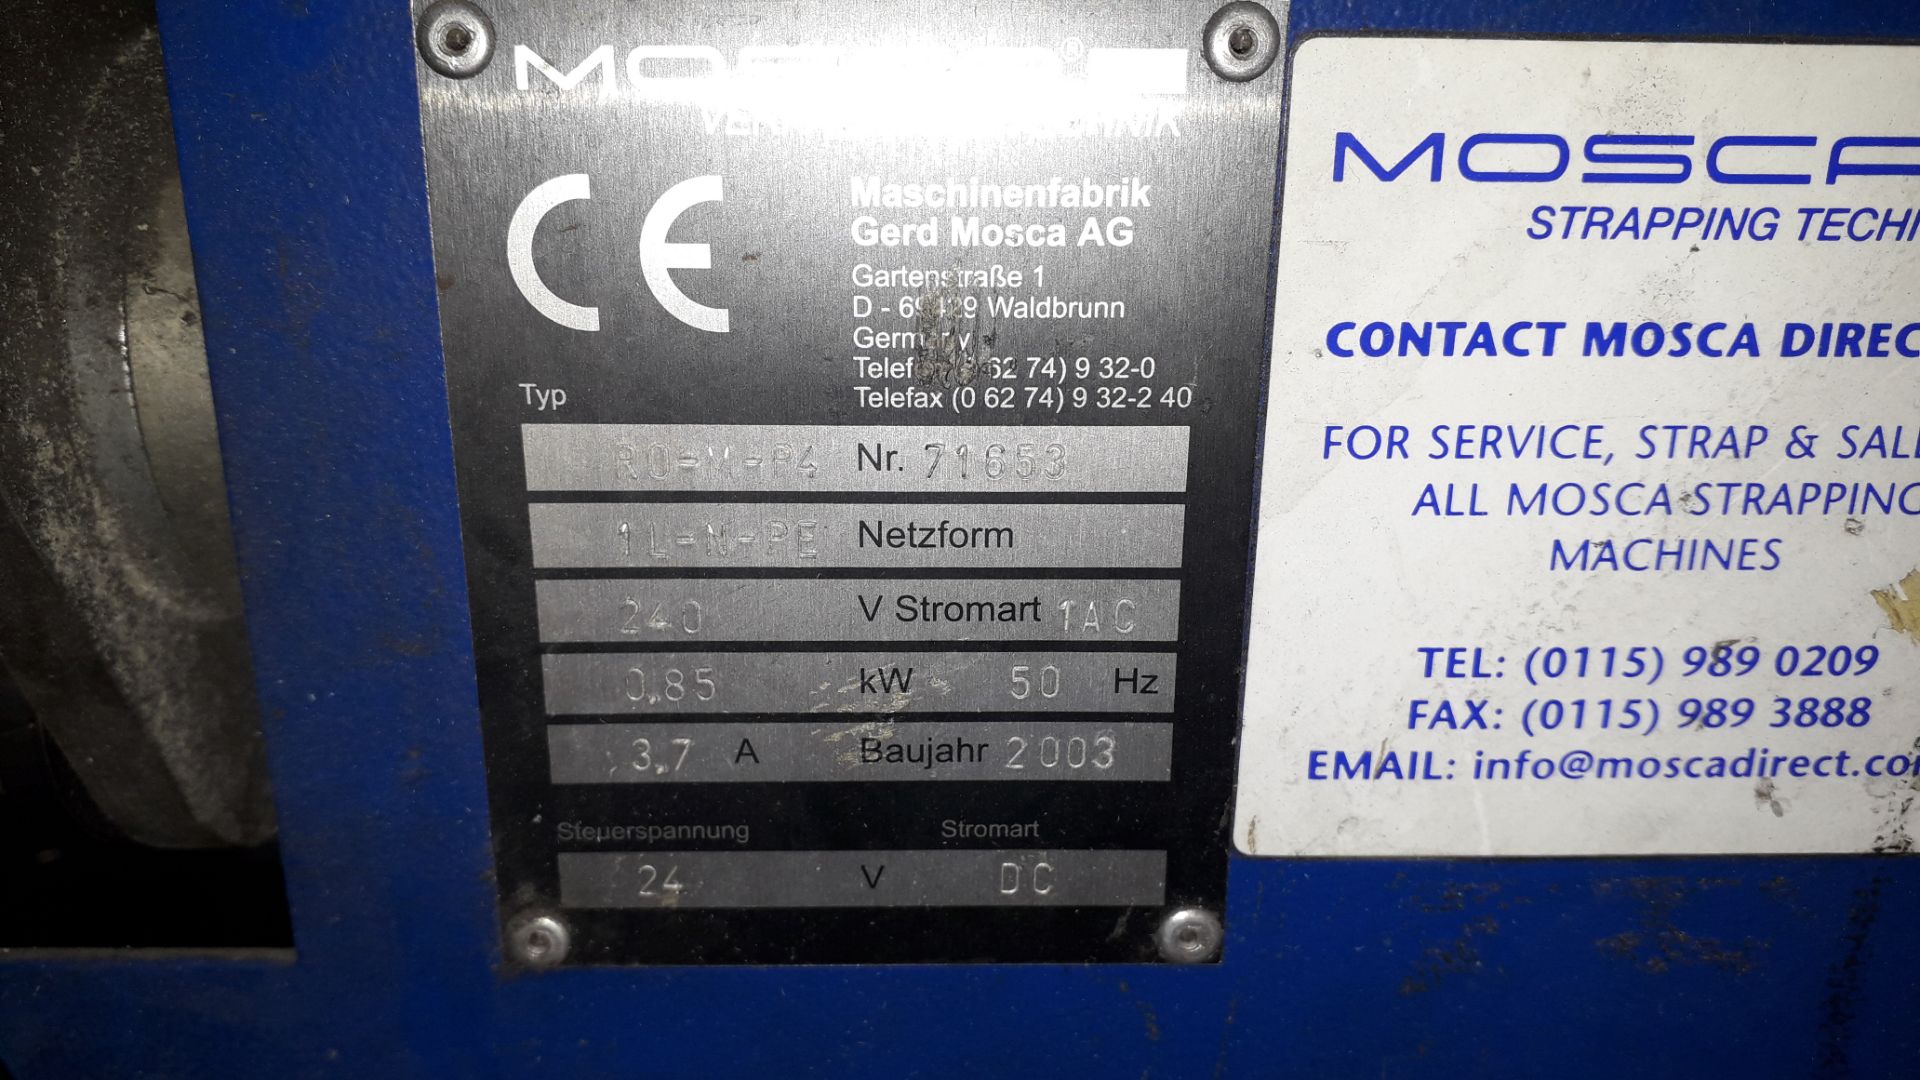 Mosca ROM P4 Strapping Machine, Serial Number 71653 (2003) - Image 3 of 3